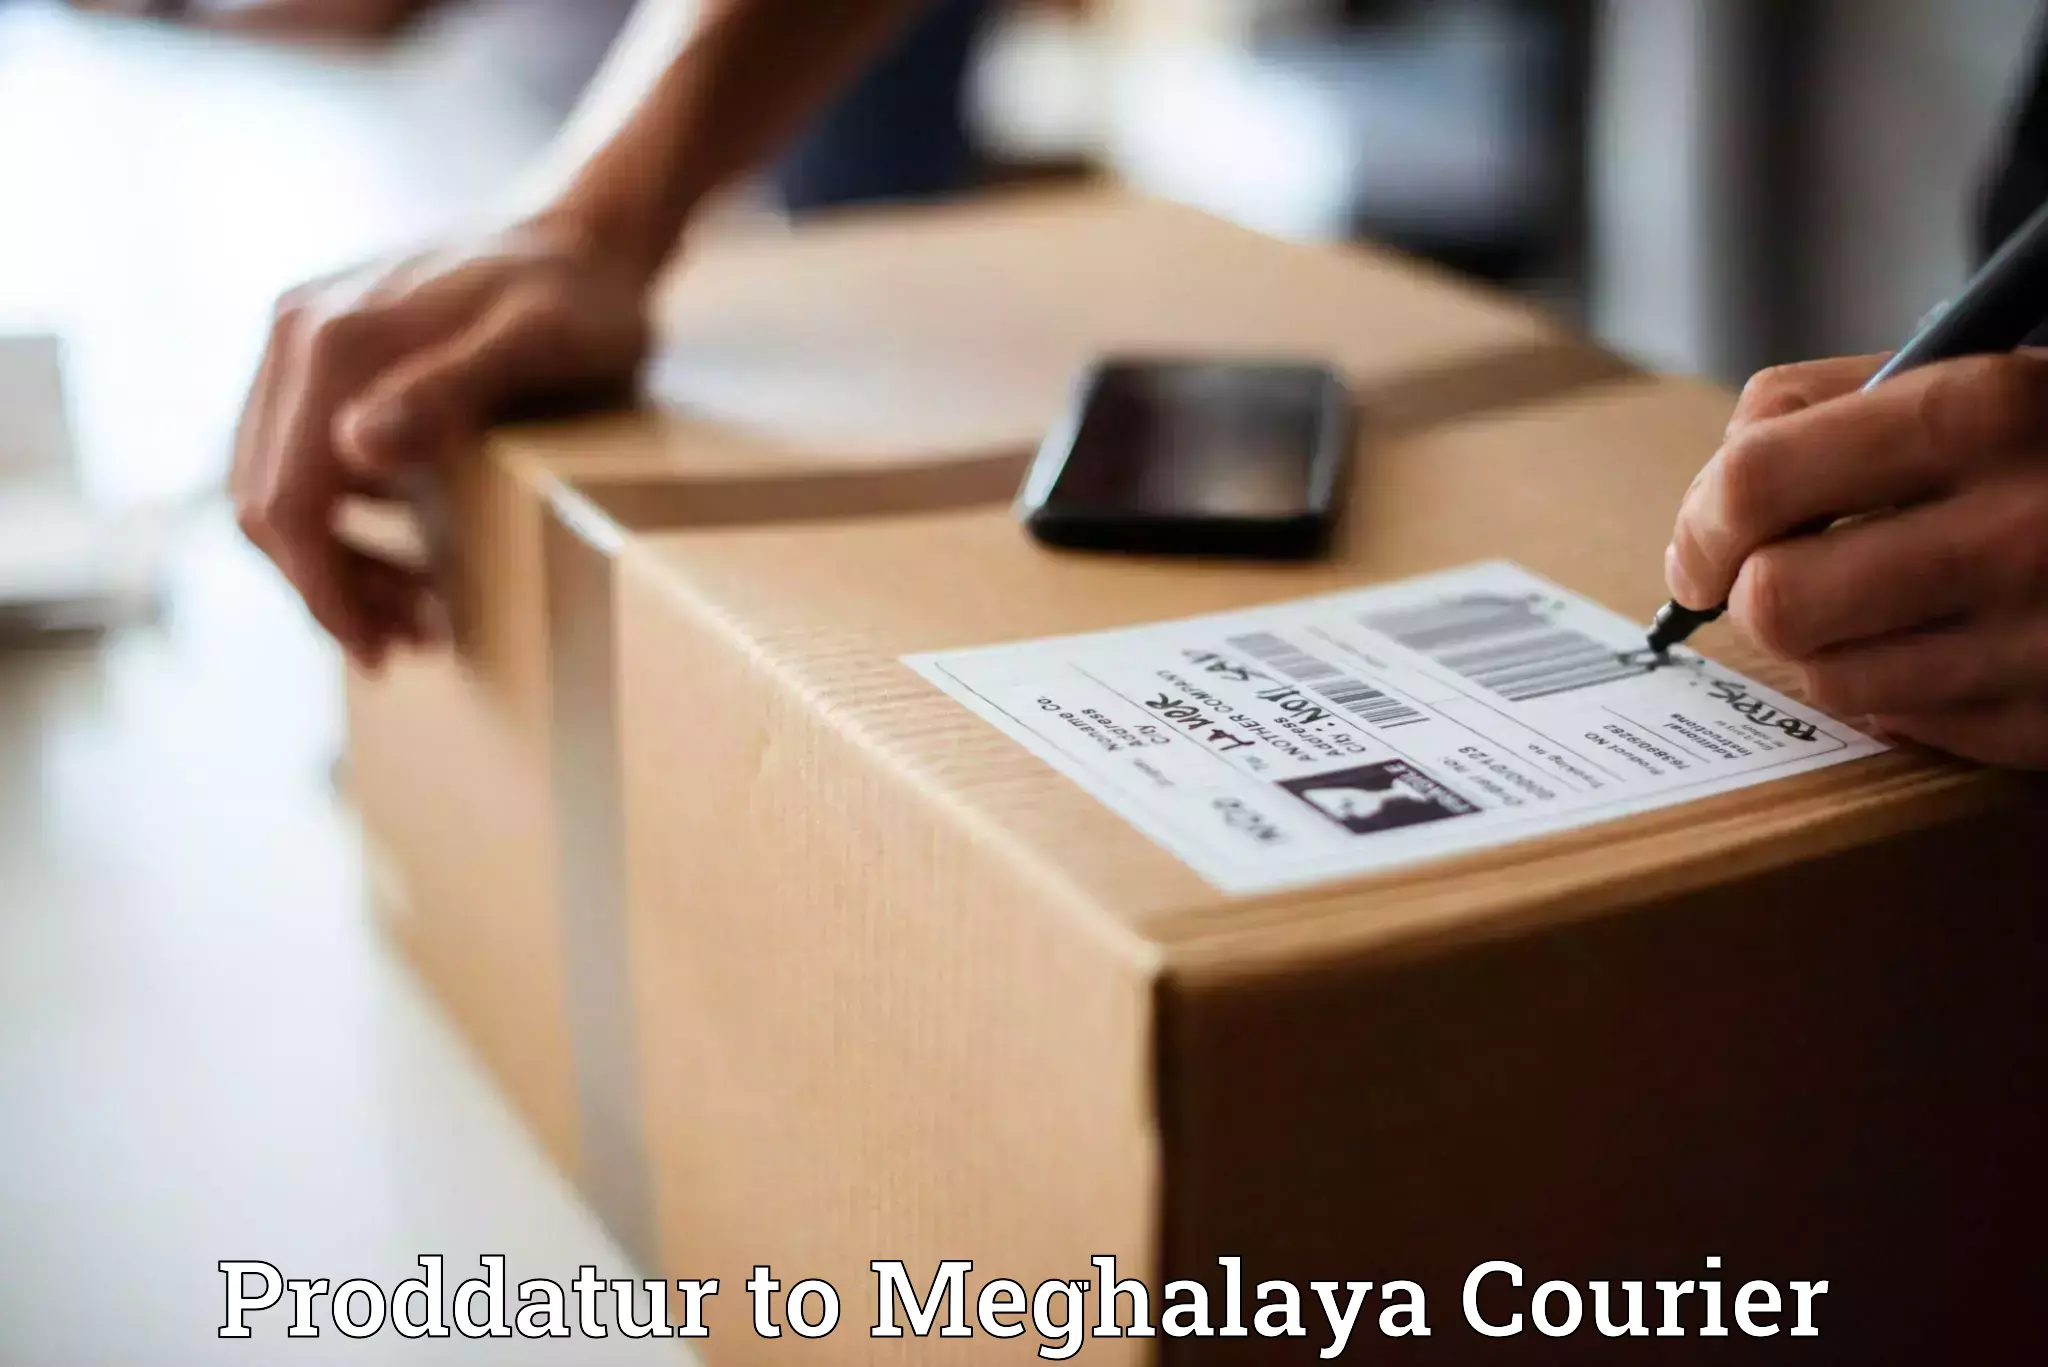 State-of-the-art courier technology Proddatur to Marshillong